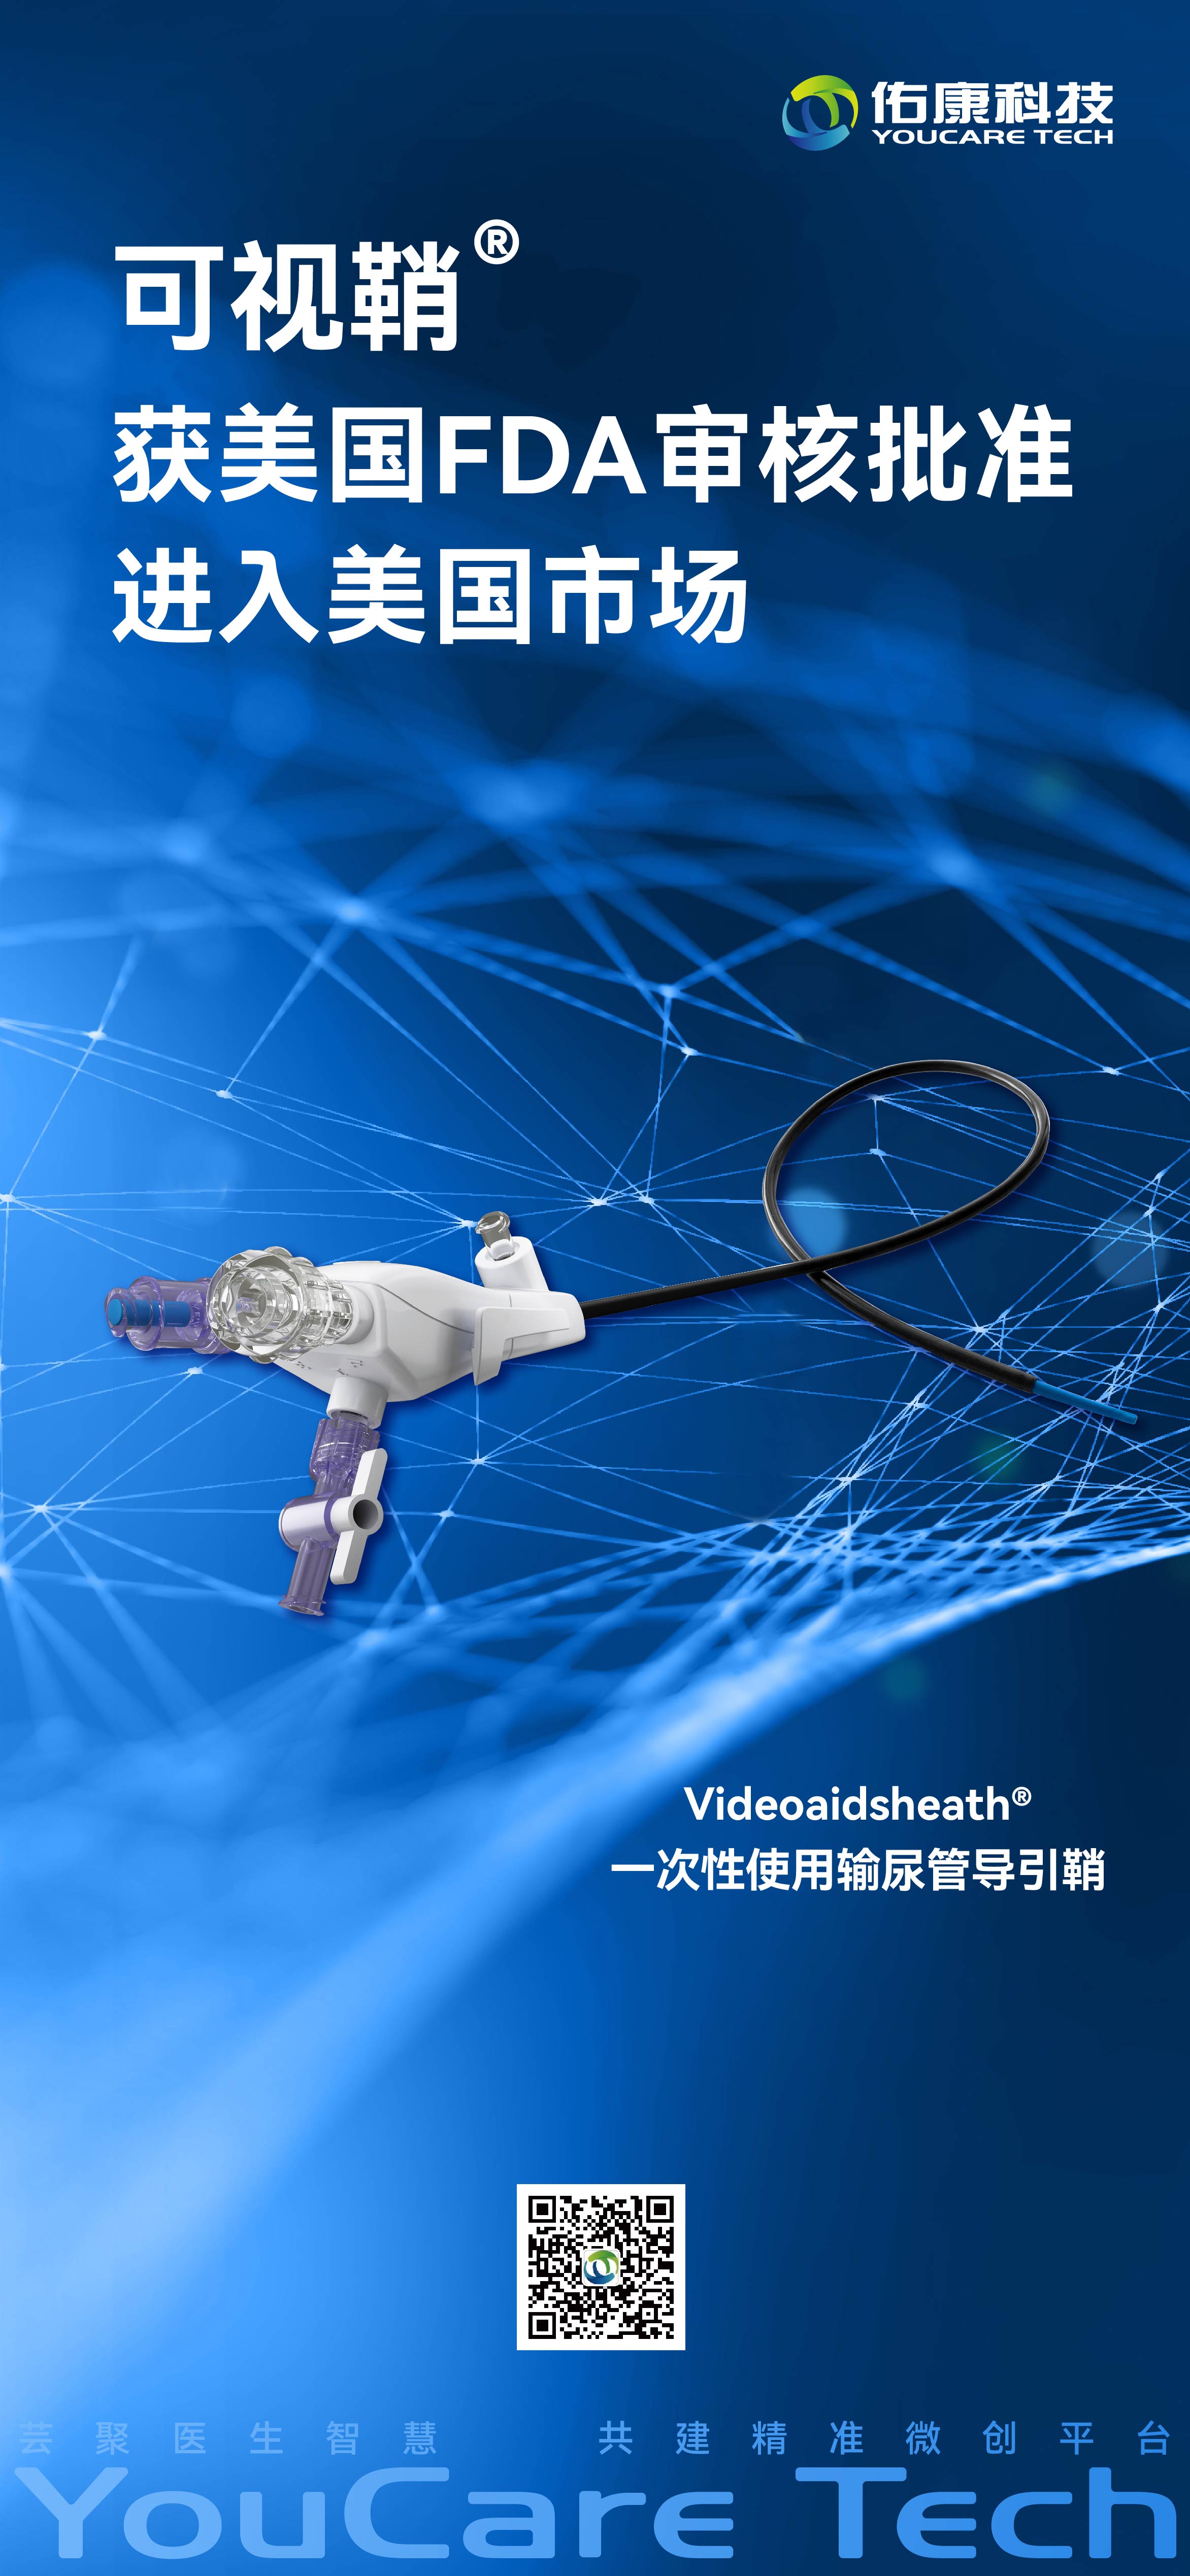 Videoaidsheath® are approved by FDA to enter the U. S. market